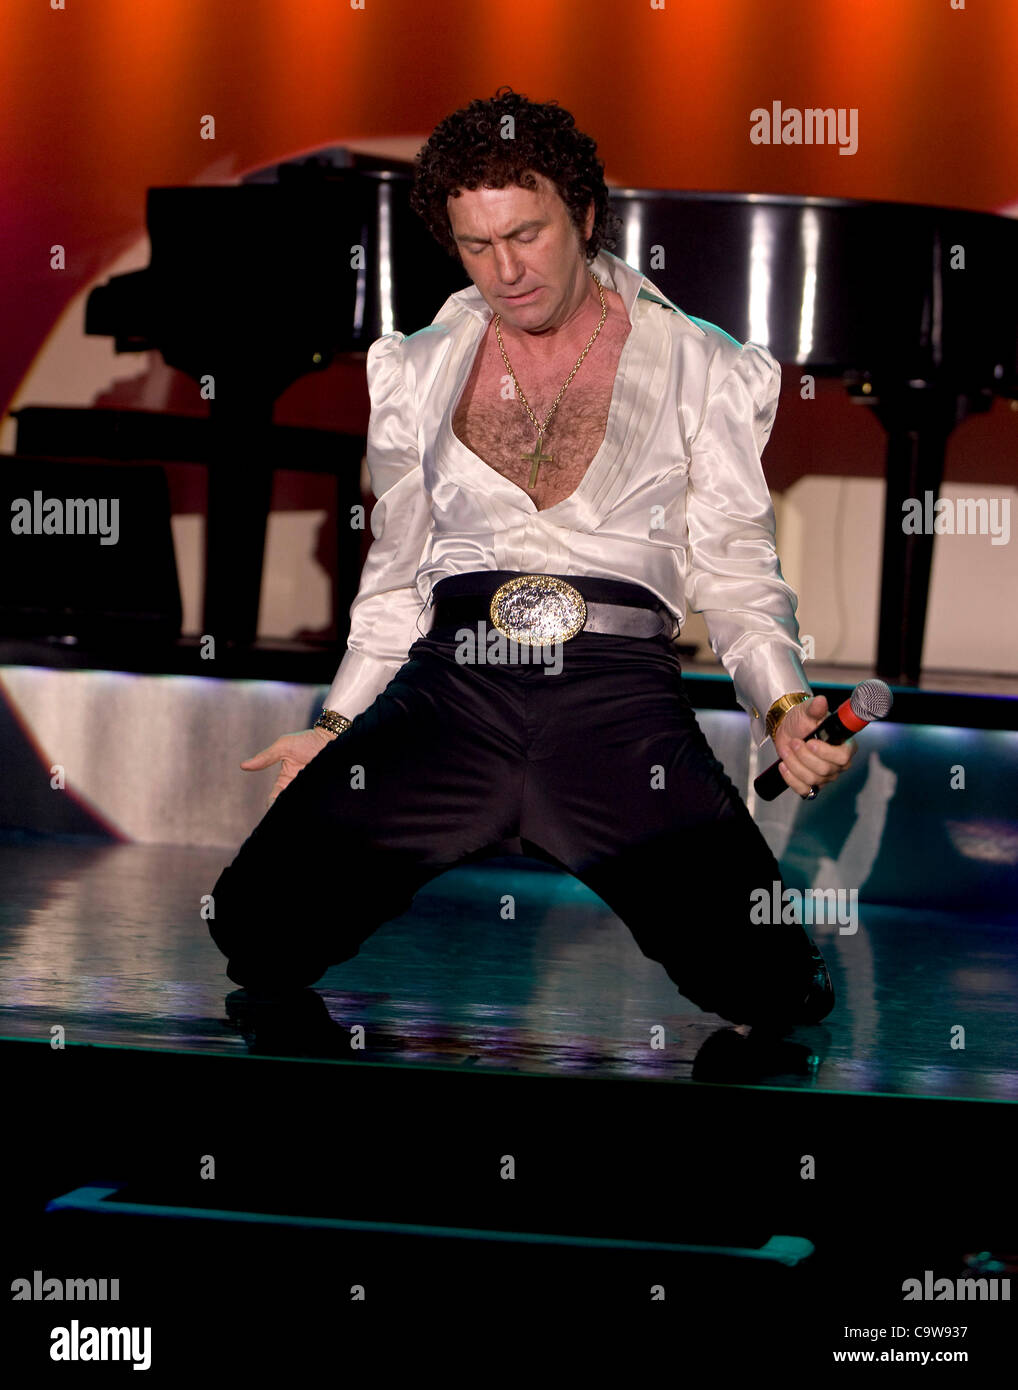 Feb. 20, 2012 - Las Vegas, NV, USA - Dave LaFame performs as Tom Jones  during the 12th annual Celebrity Impersonators Convention at the Golden  Nugget Hotel and Casino. The convention is